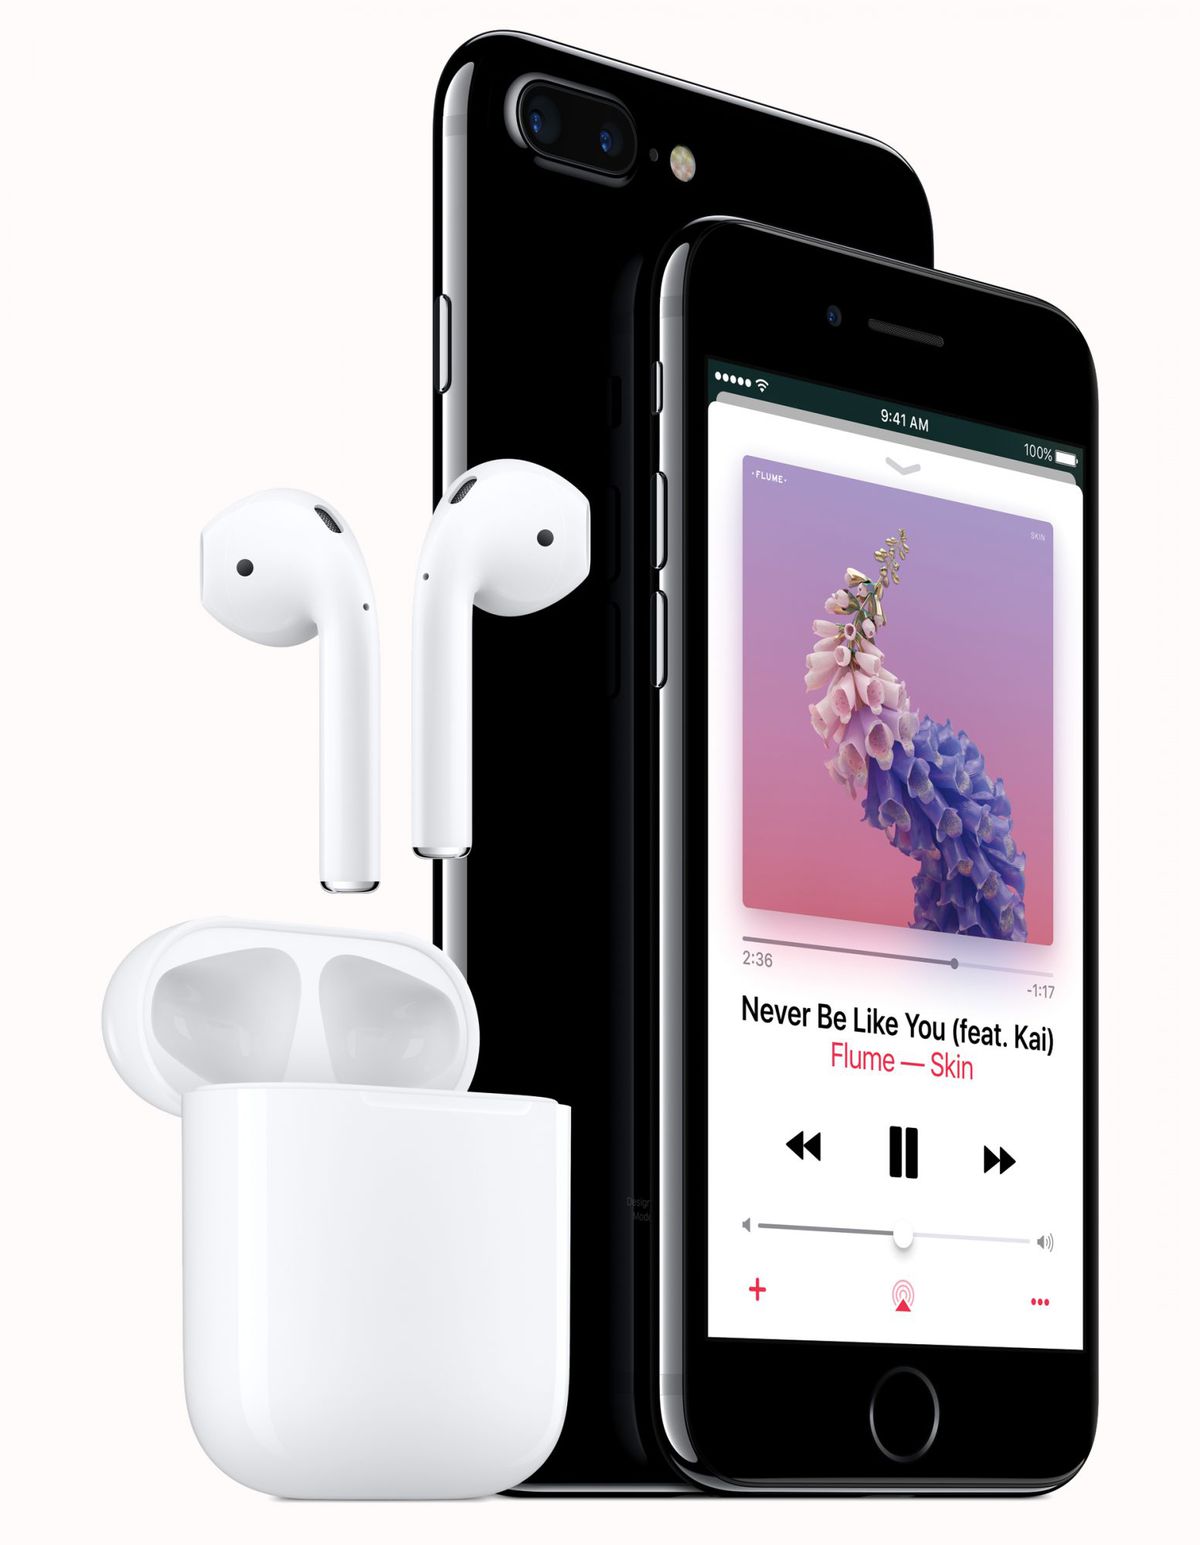 IPhone 7 and AirPods